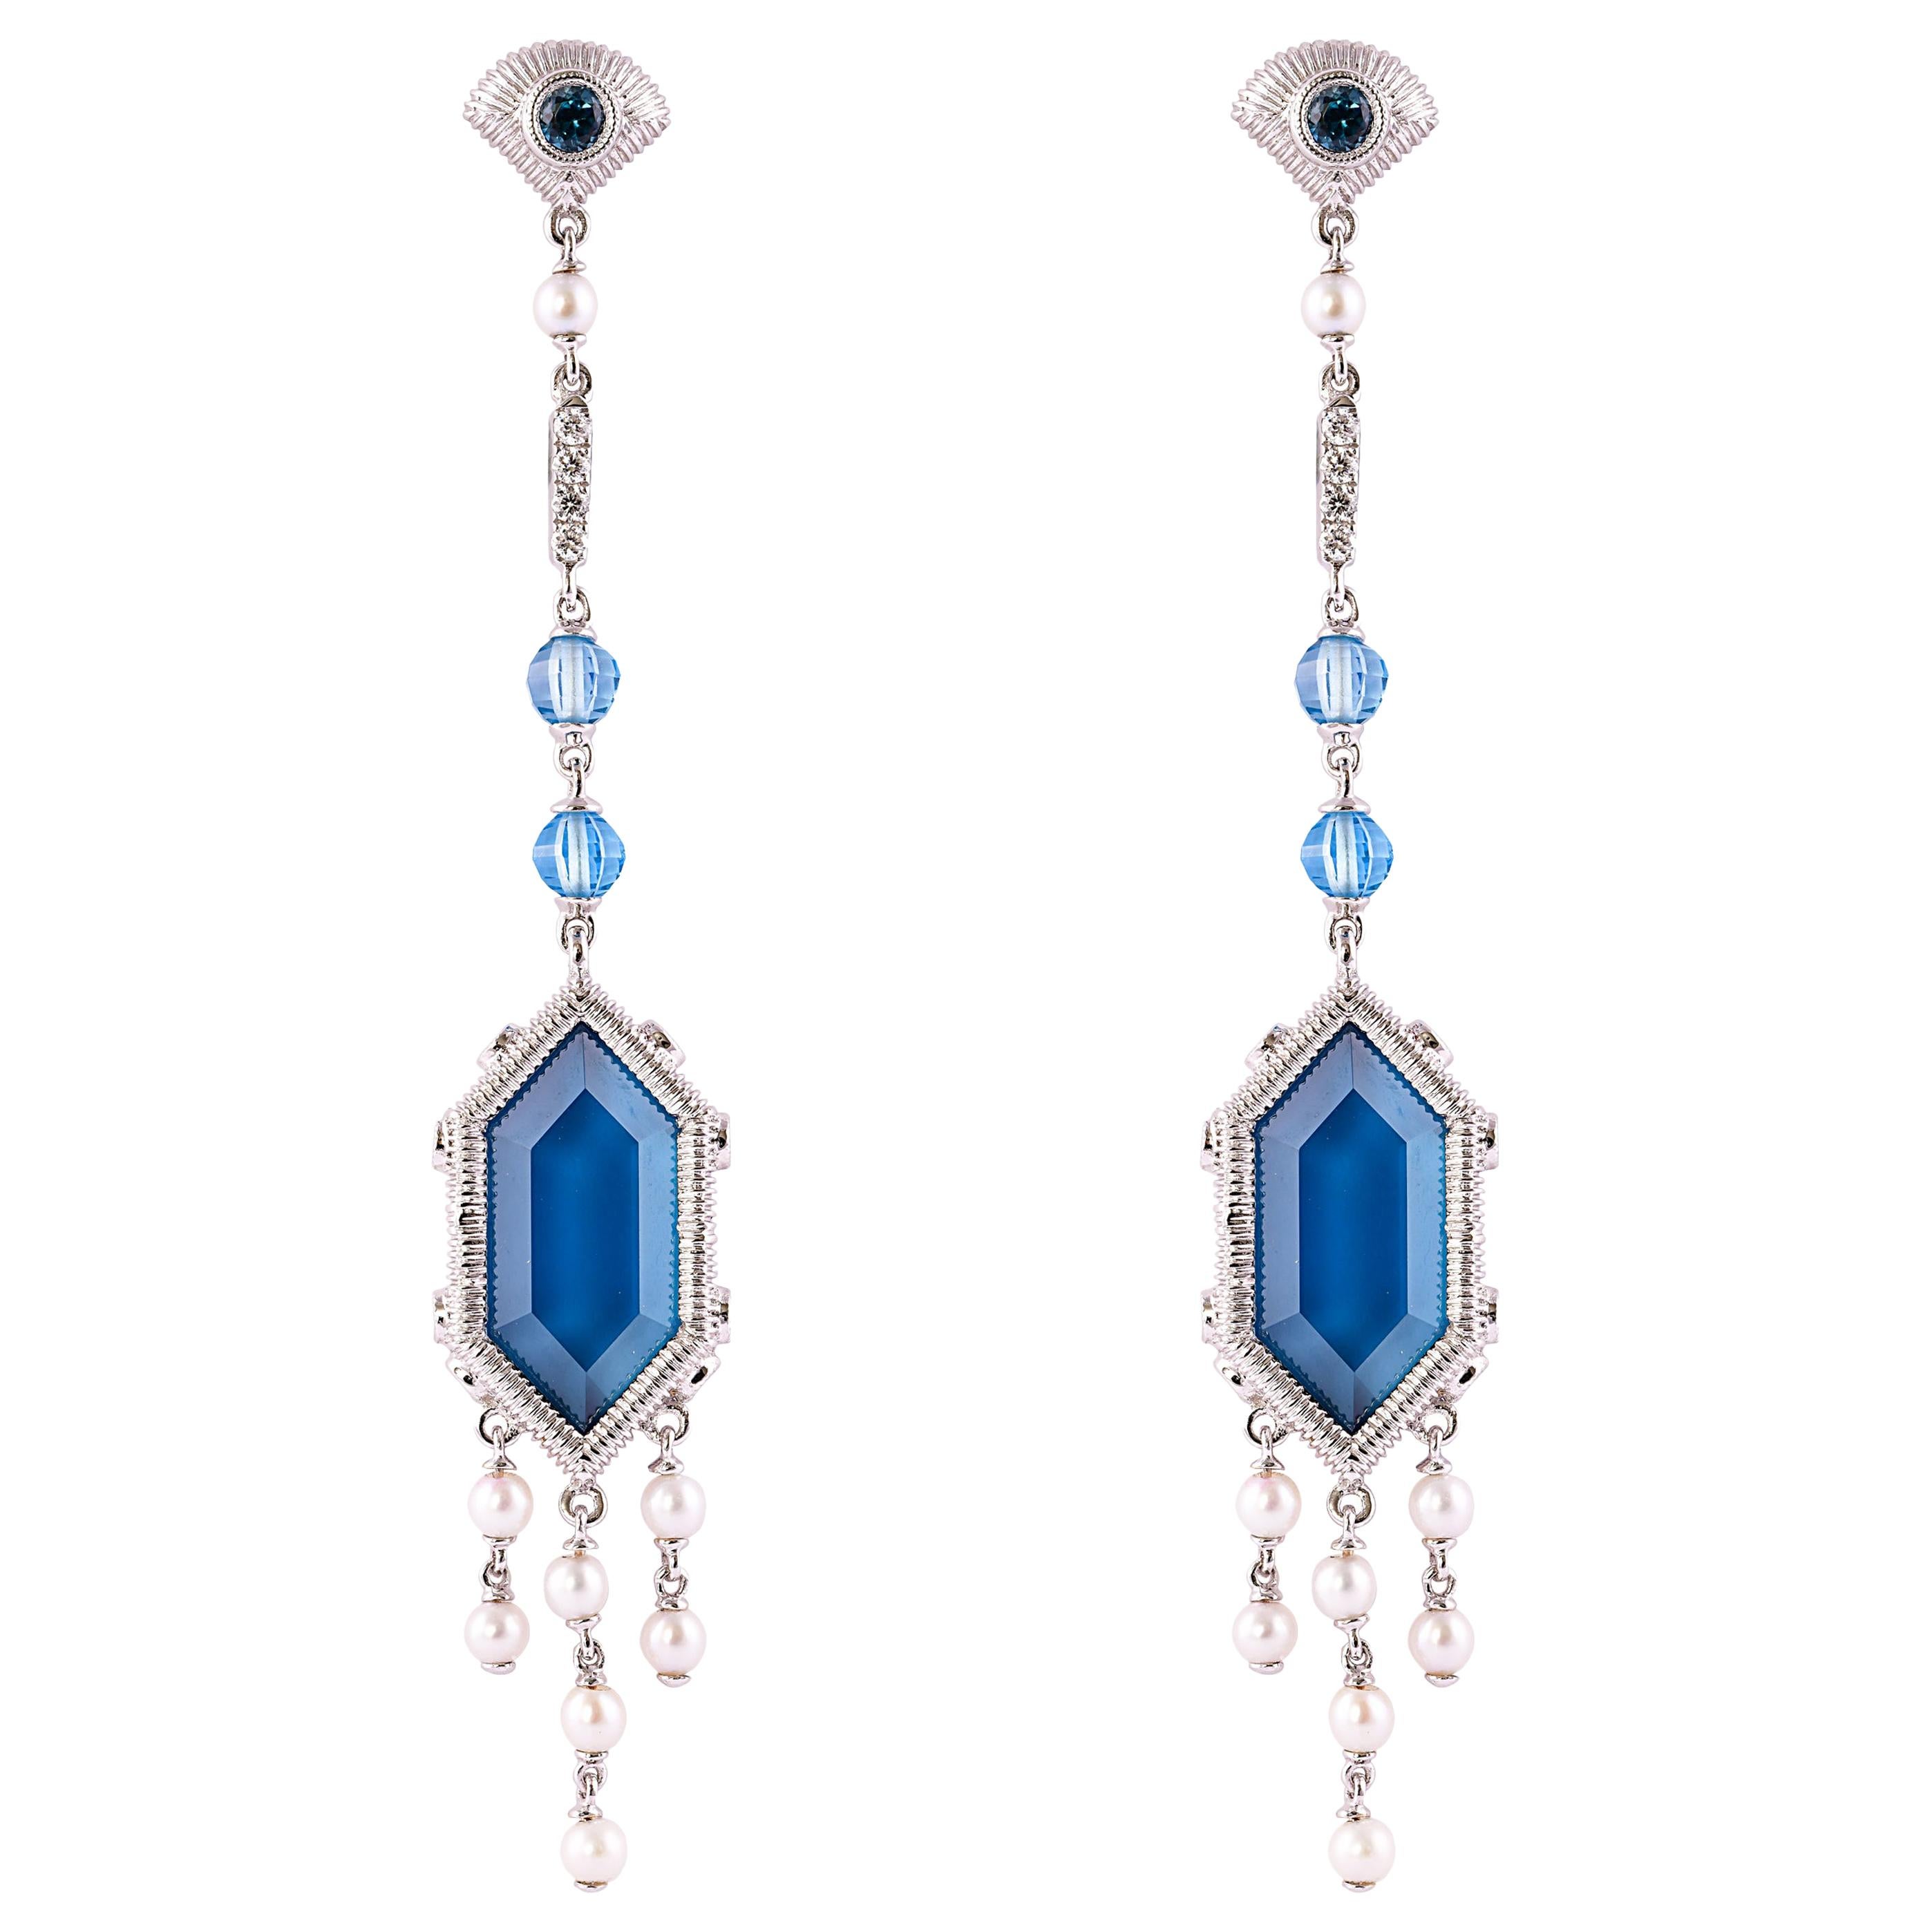 20 Carat London Blue Topaz Earring in 18 Karat Gold with Diamonds and Pearls